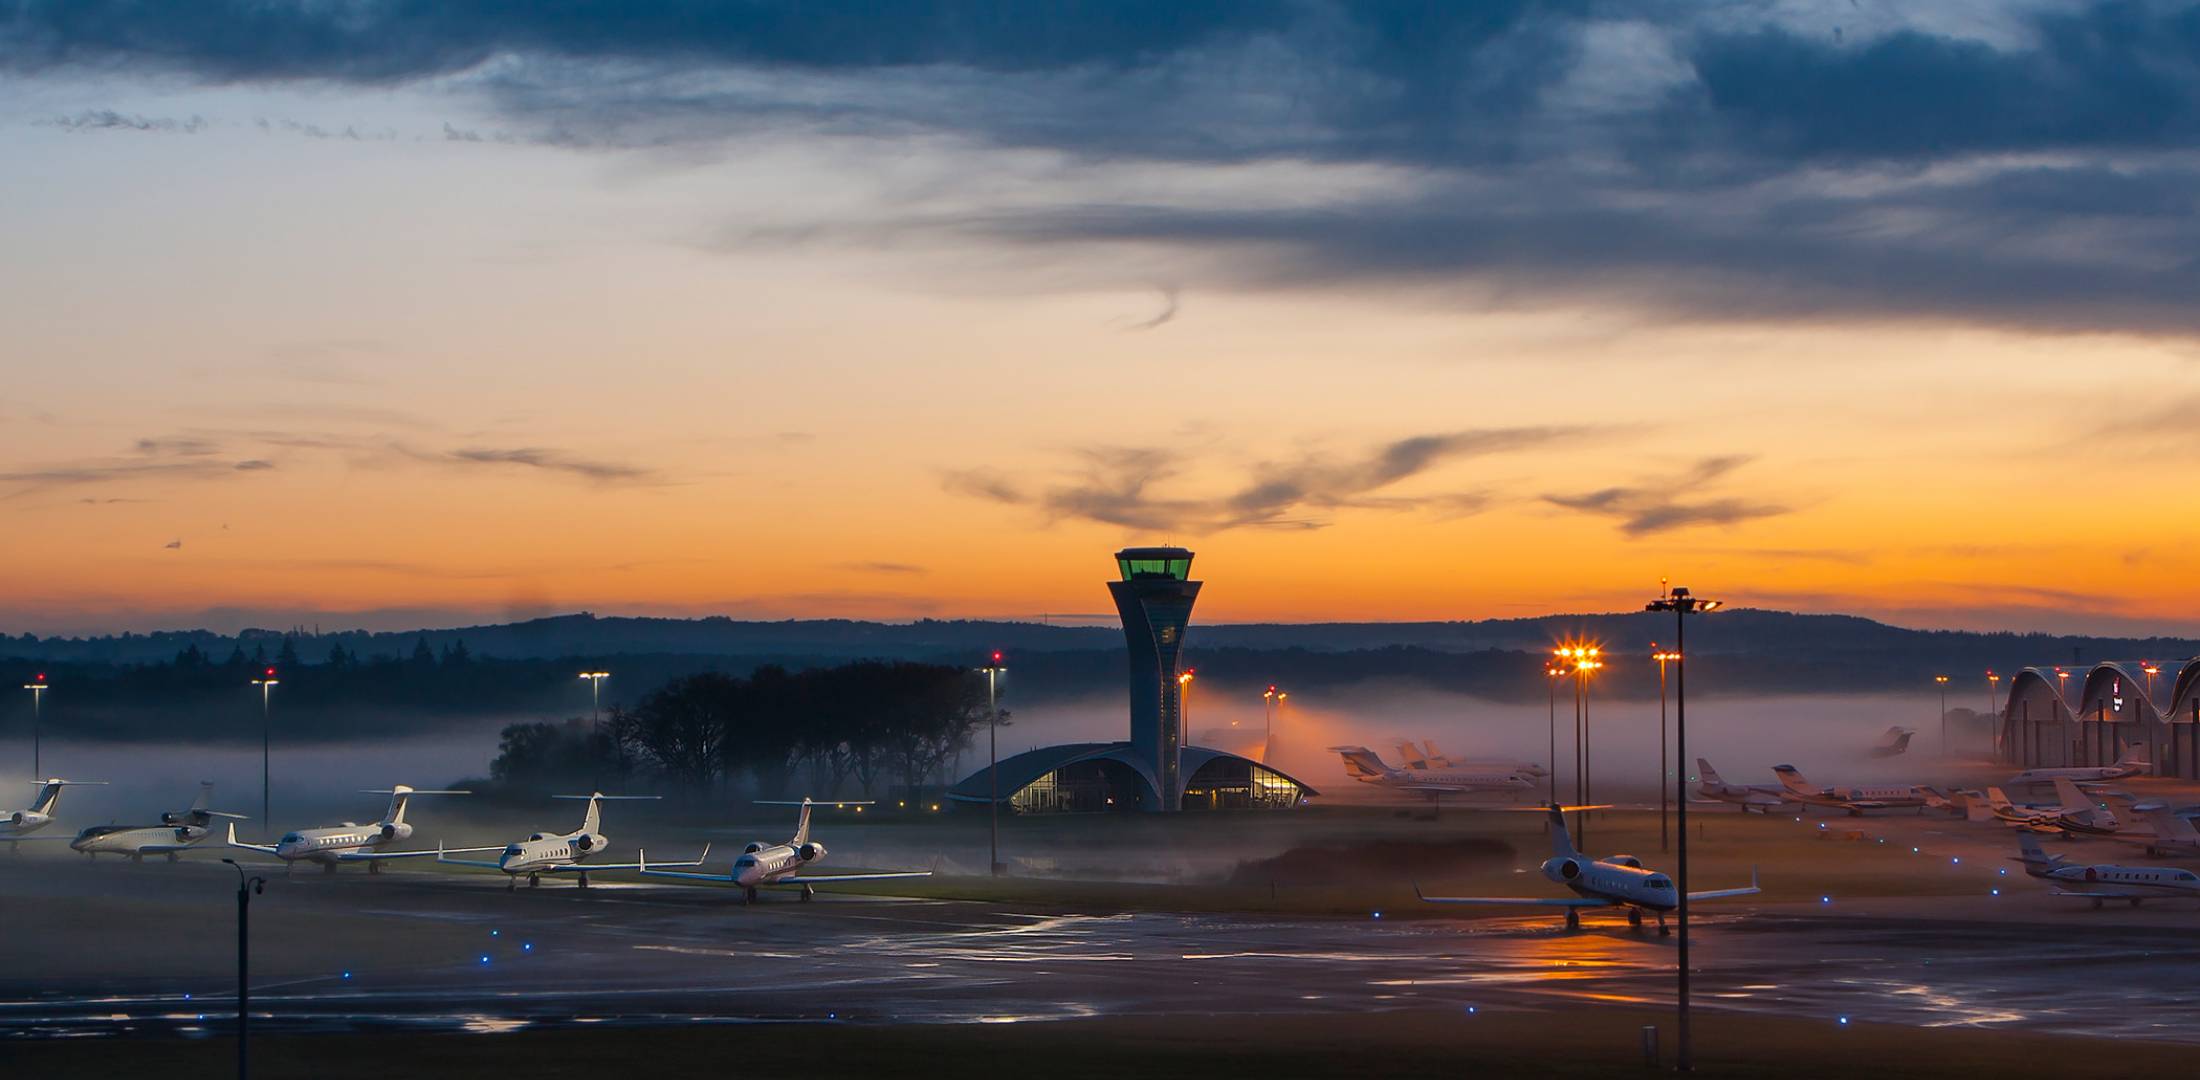 Business jets at Farnborough Airport shrouded with fog at dusk